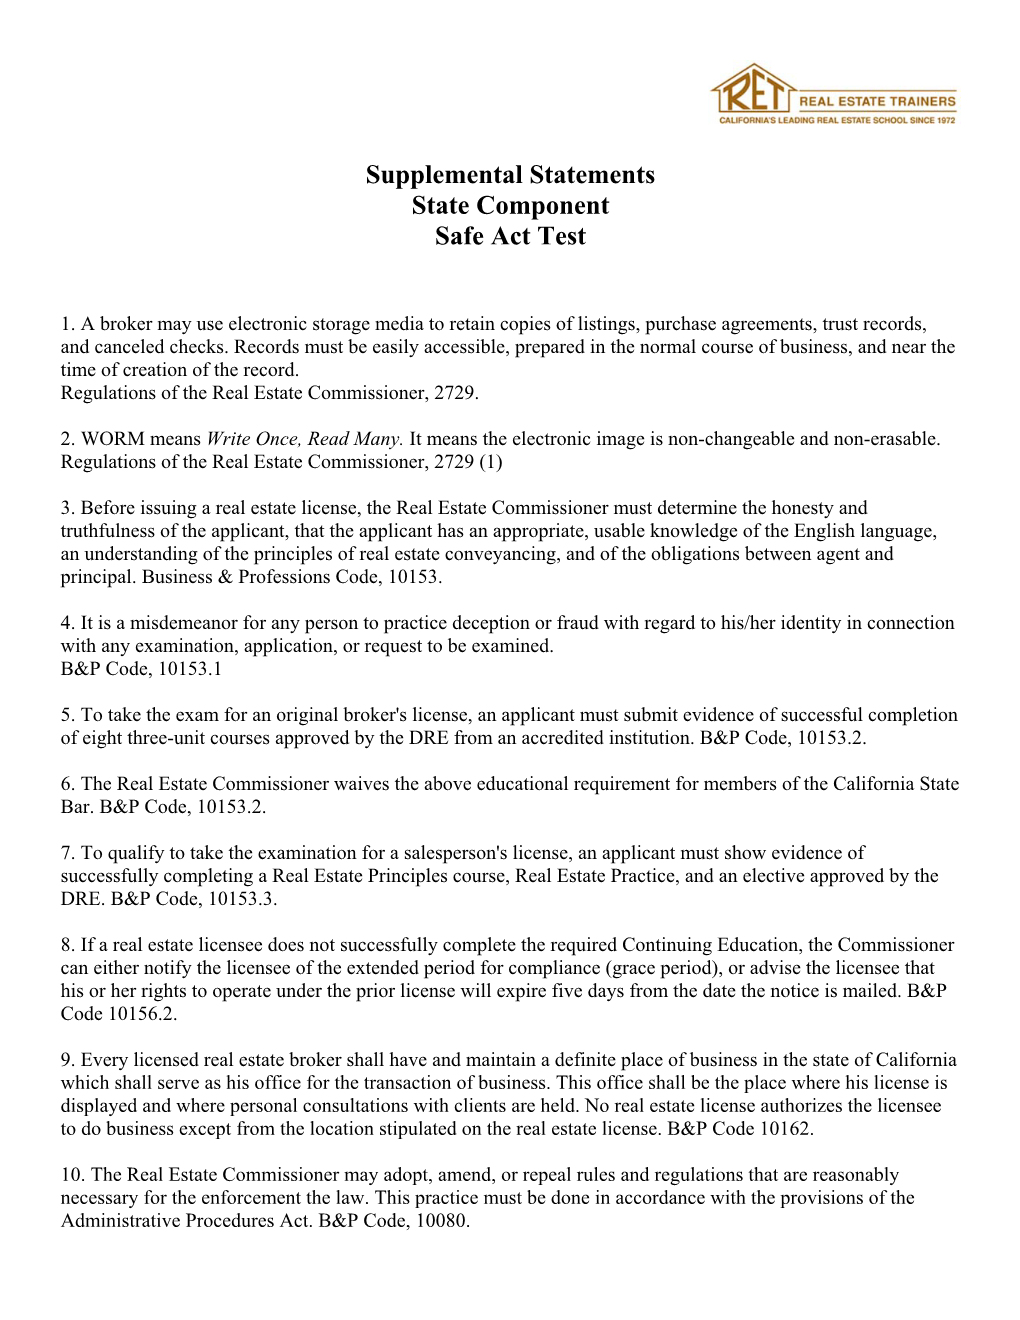 Supplemental Statements State Component Safe Act Test